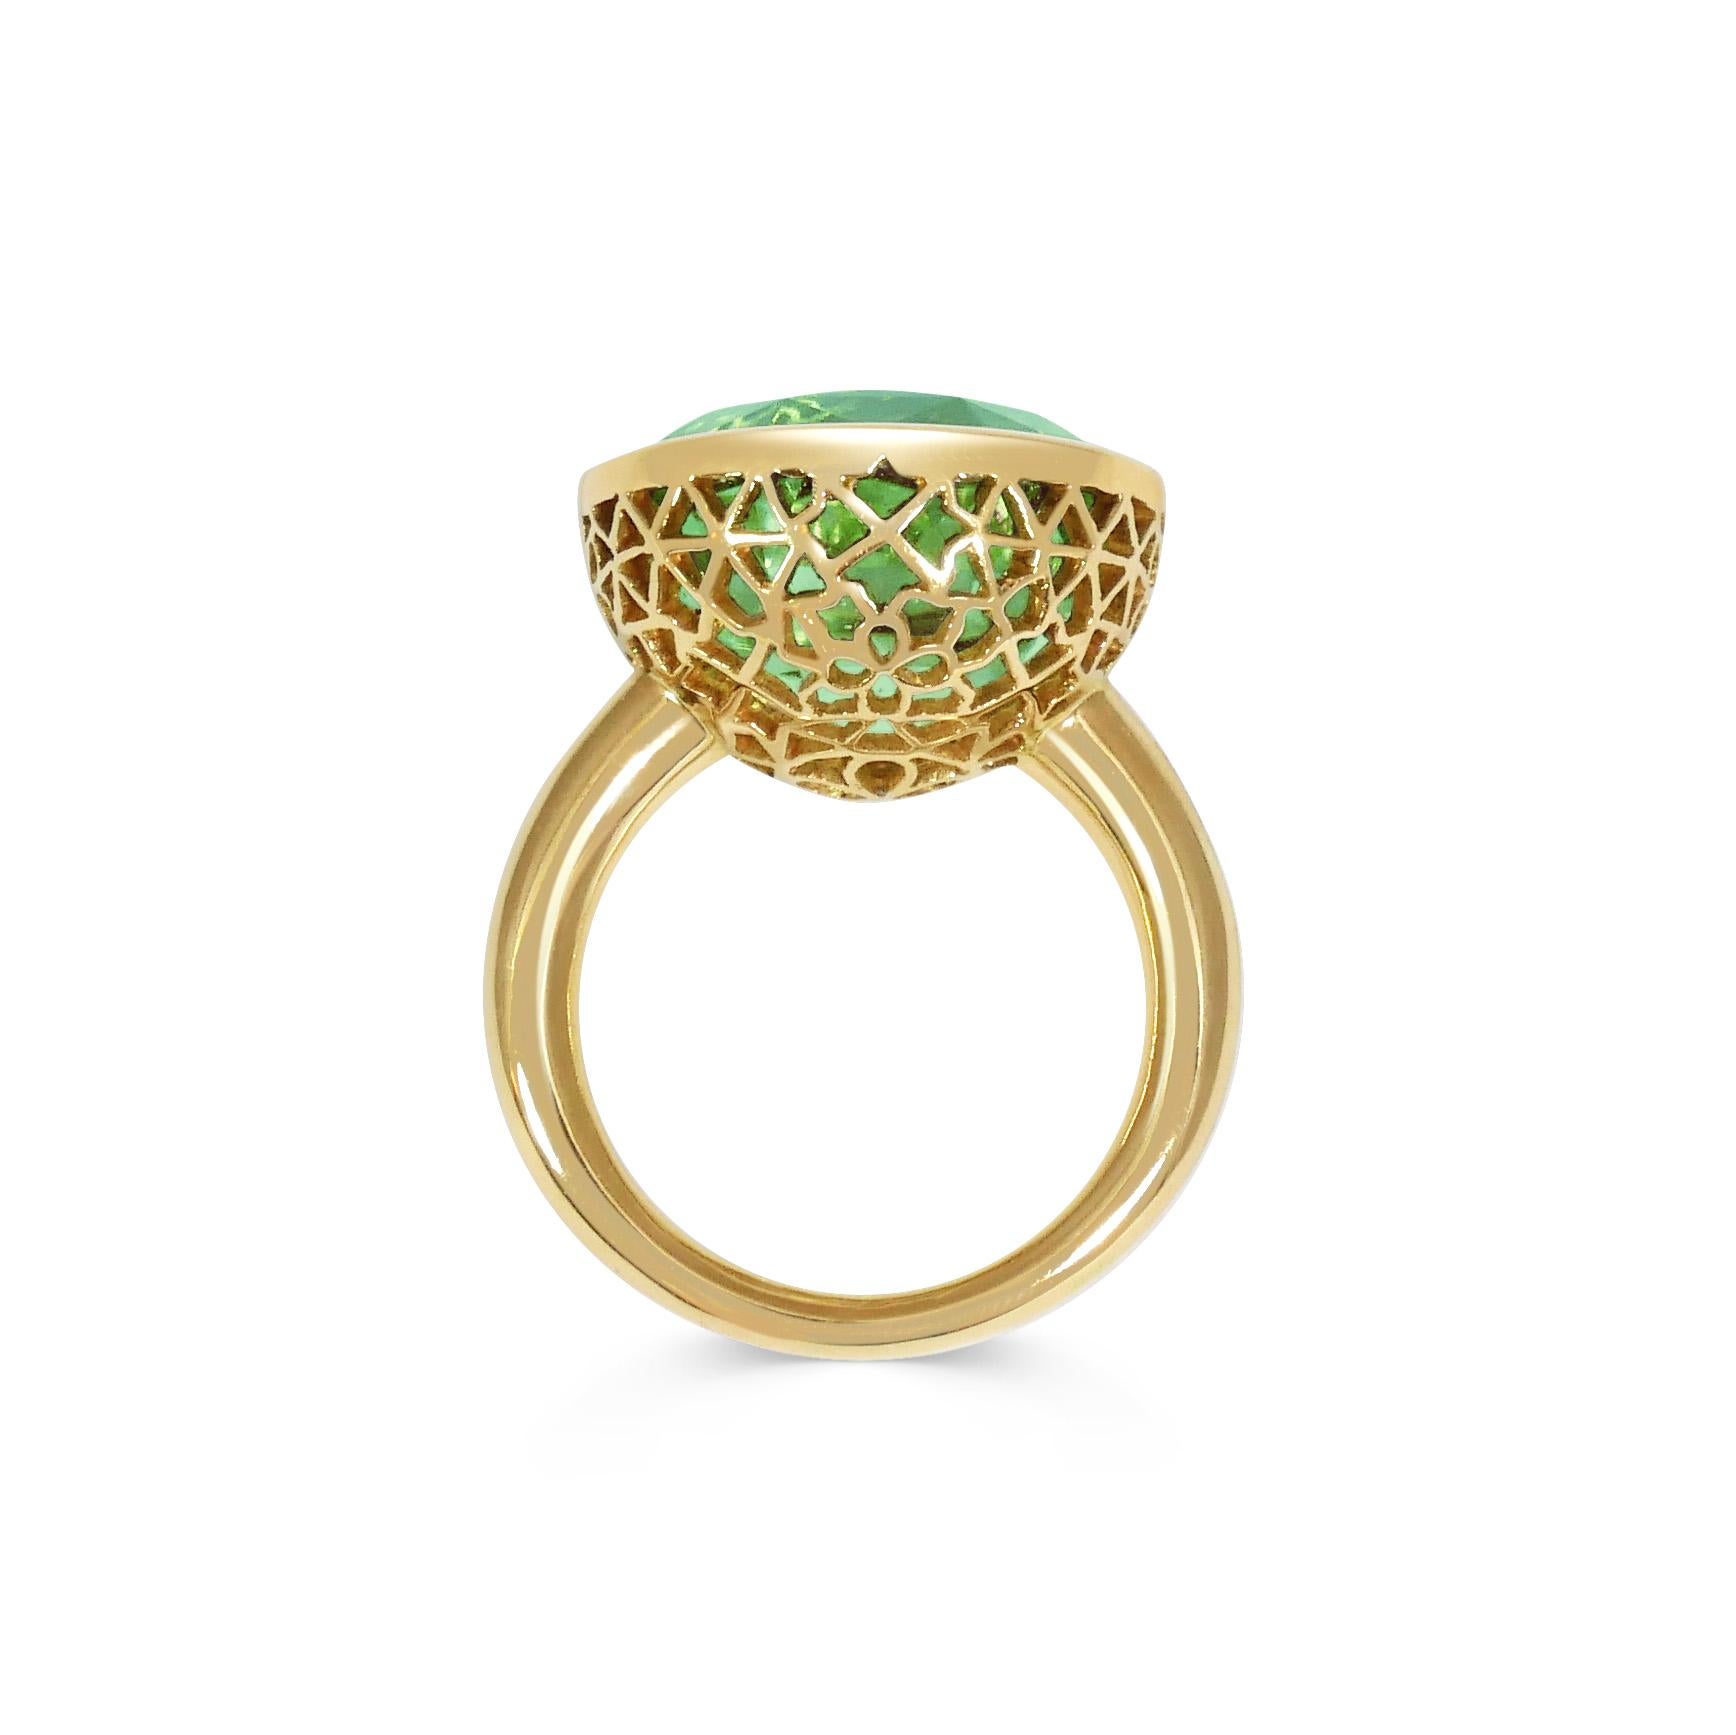 Handcrafted Oval Cut 15,50 Carats Green Tourmaline 18 Karat Yellow Gold Cocktail Ring. Our expert craftsmen hand pierce our iconic gold lace to fit each stone on a tapered band making each ring One of a Kind. This unique technique, inspired by our